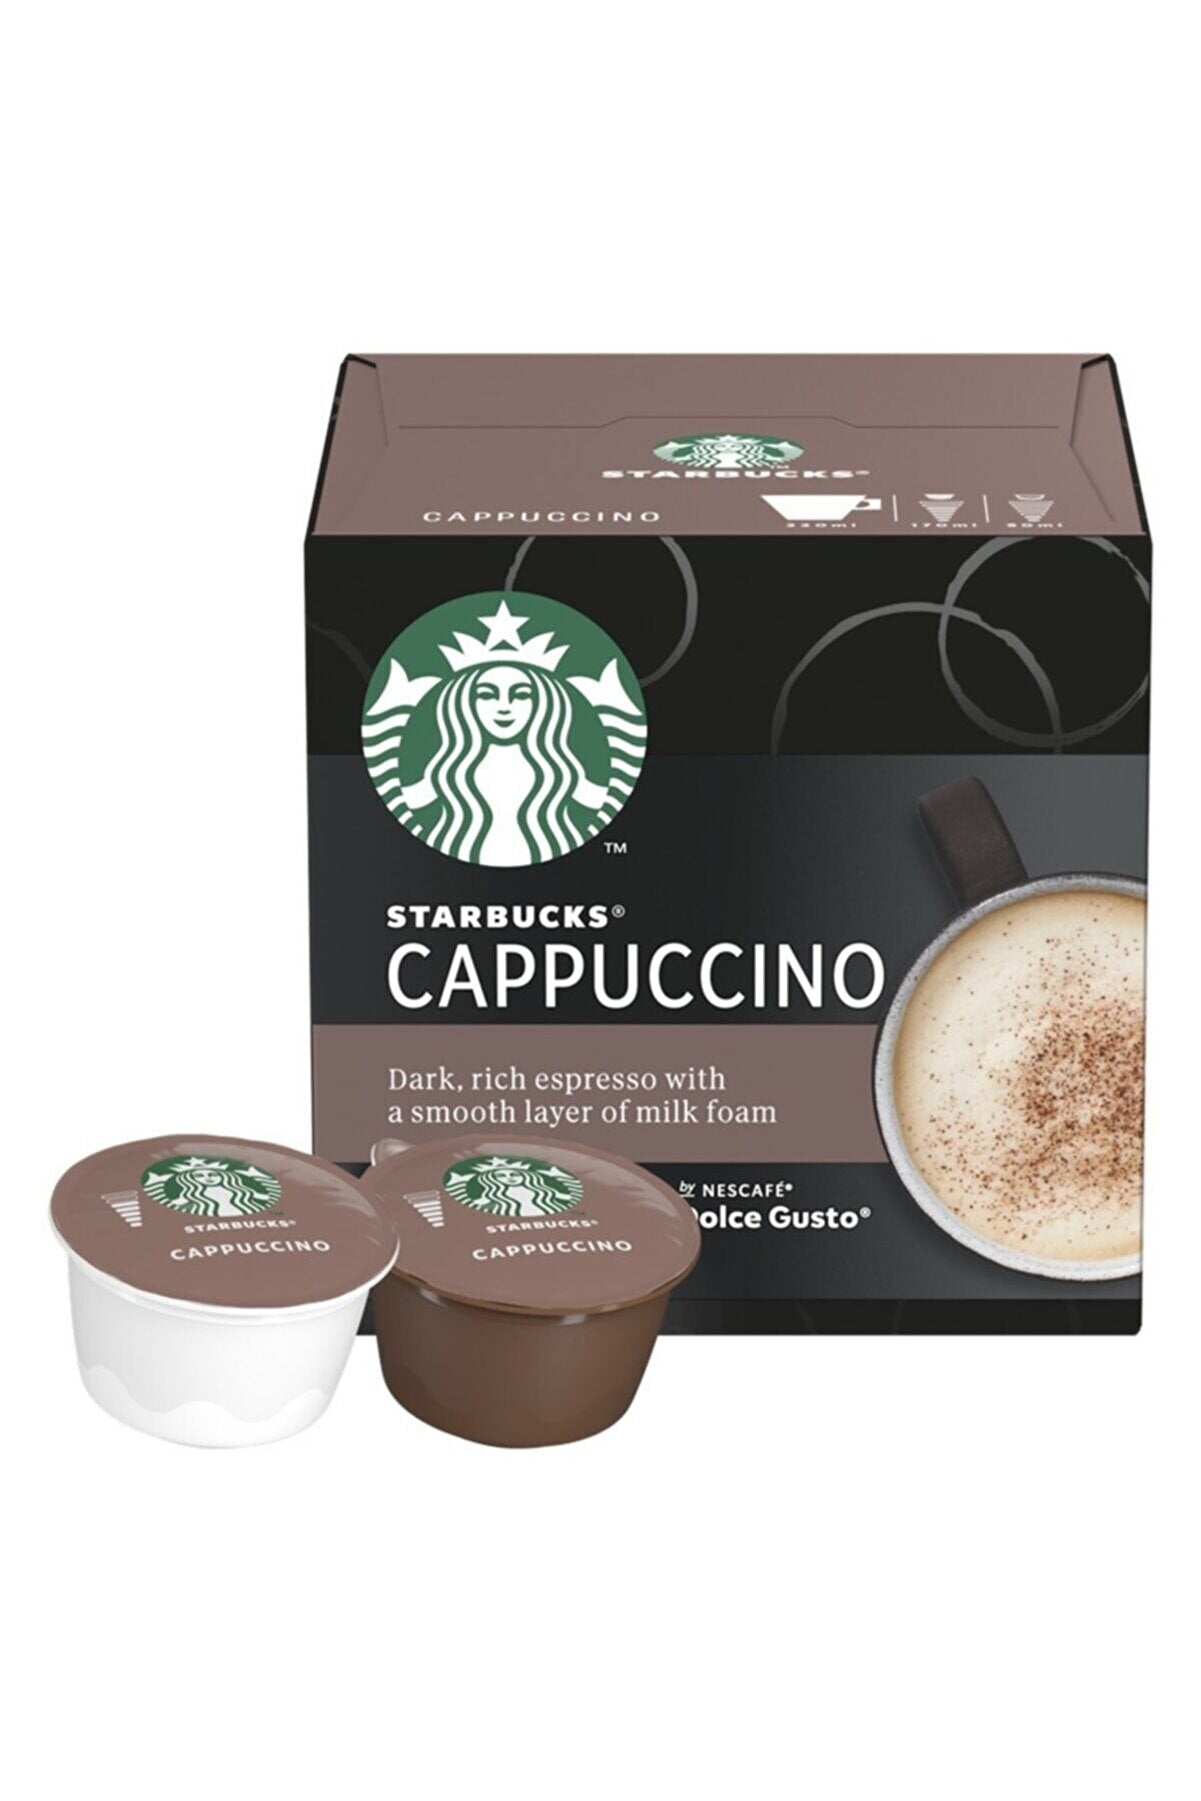 Where To Buy Starbucks Coffee Dolce Gusto Capsules